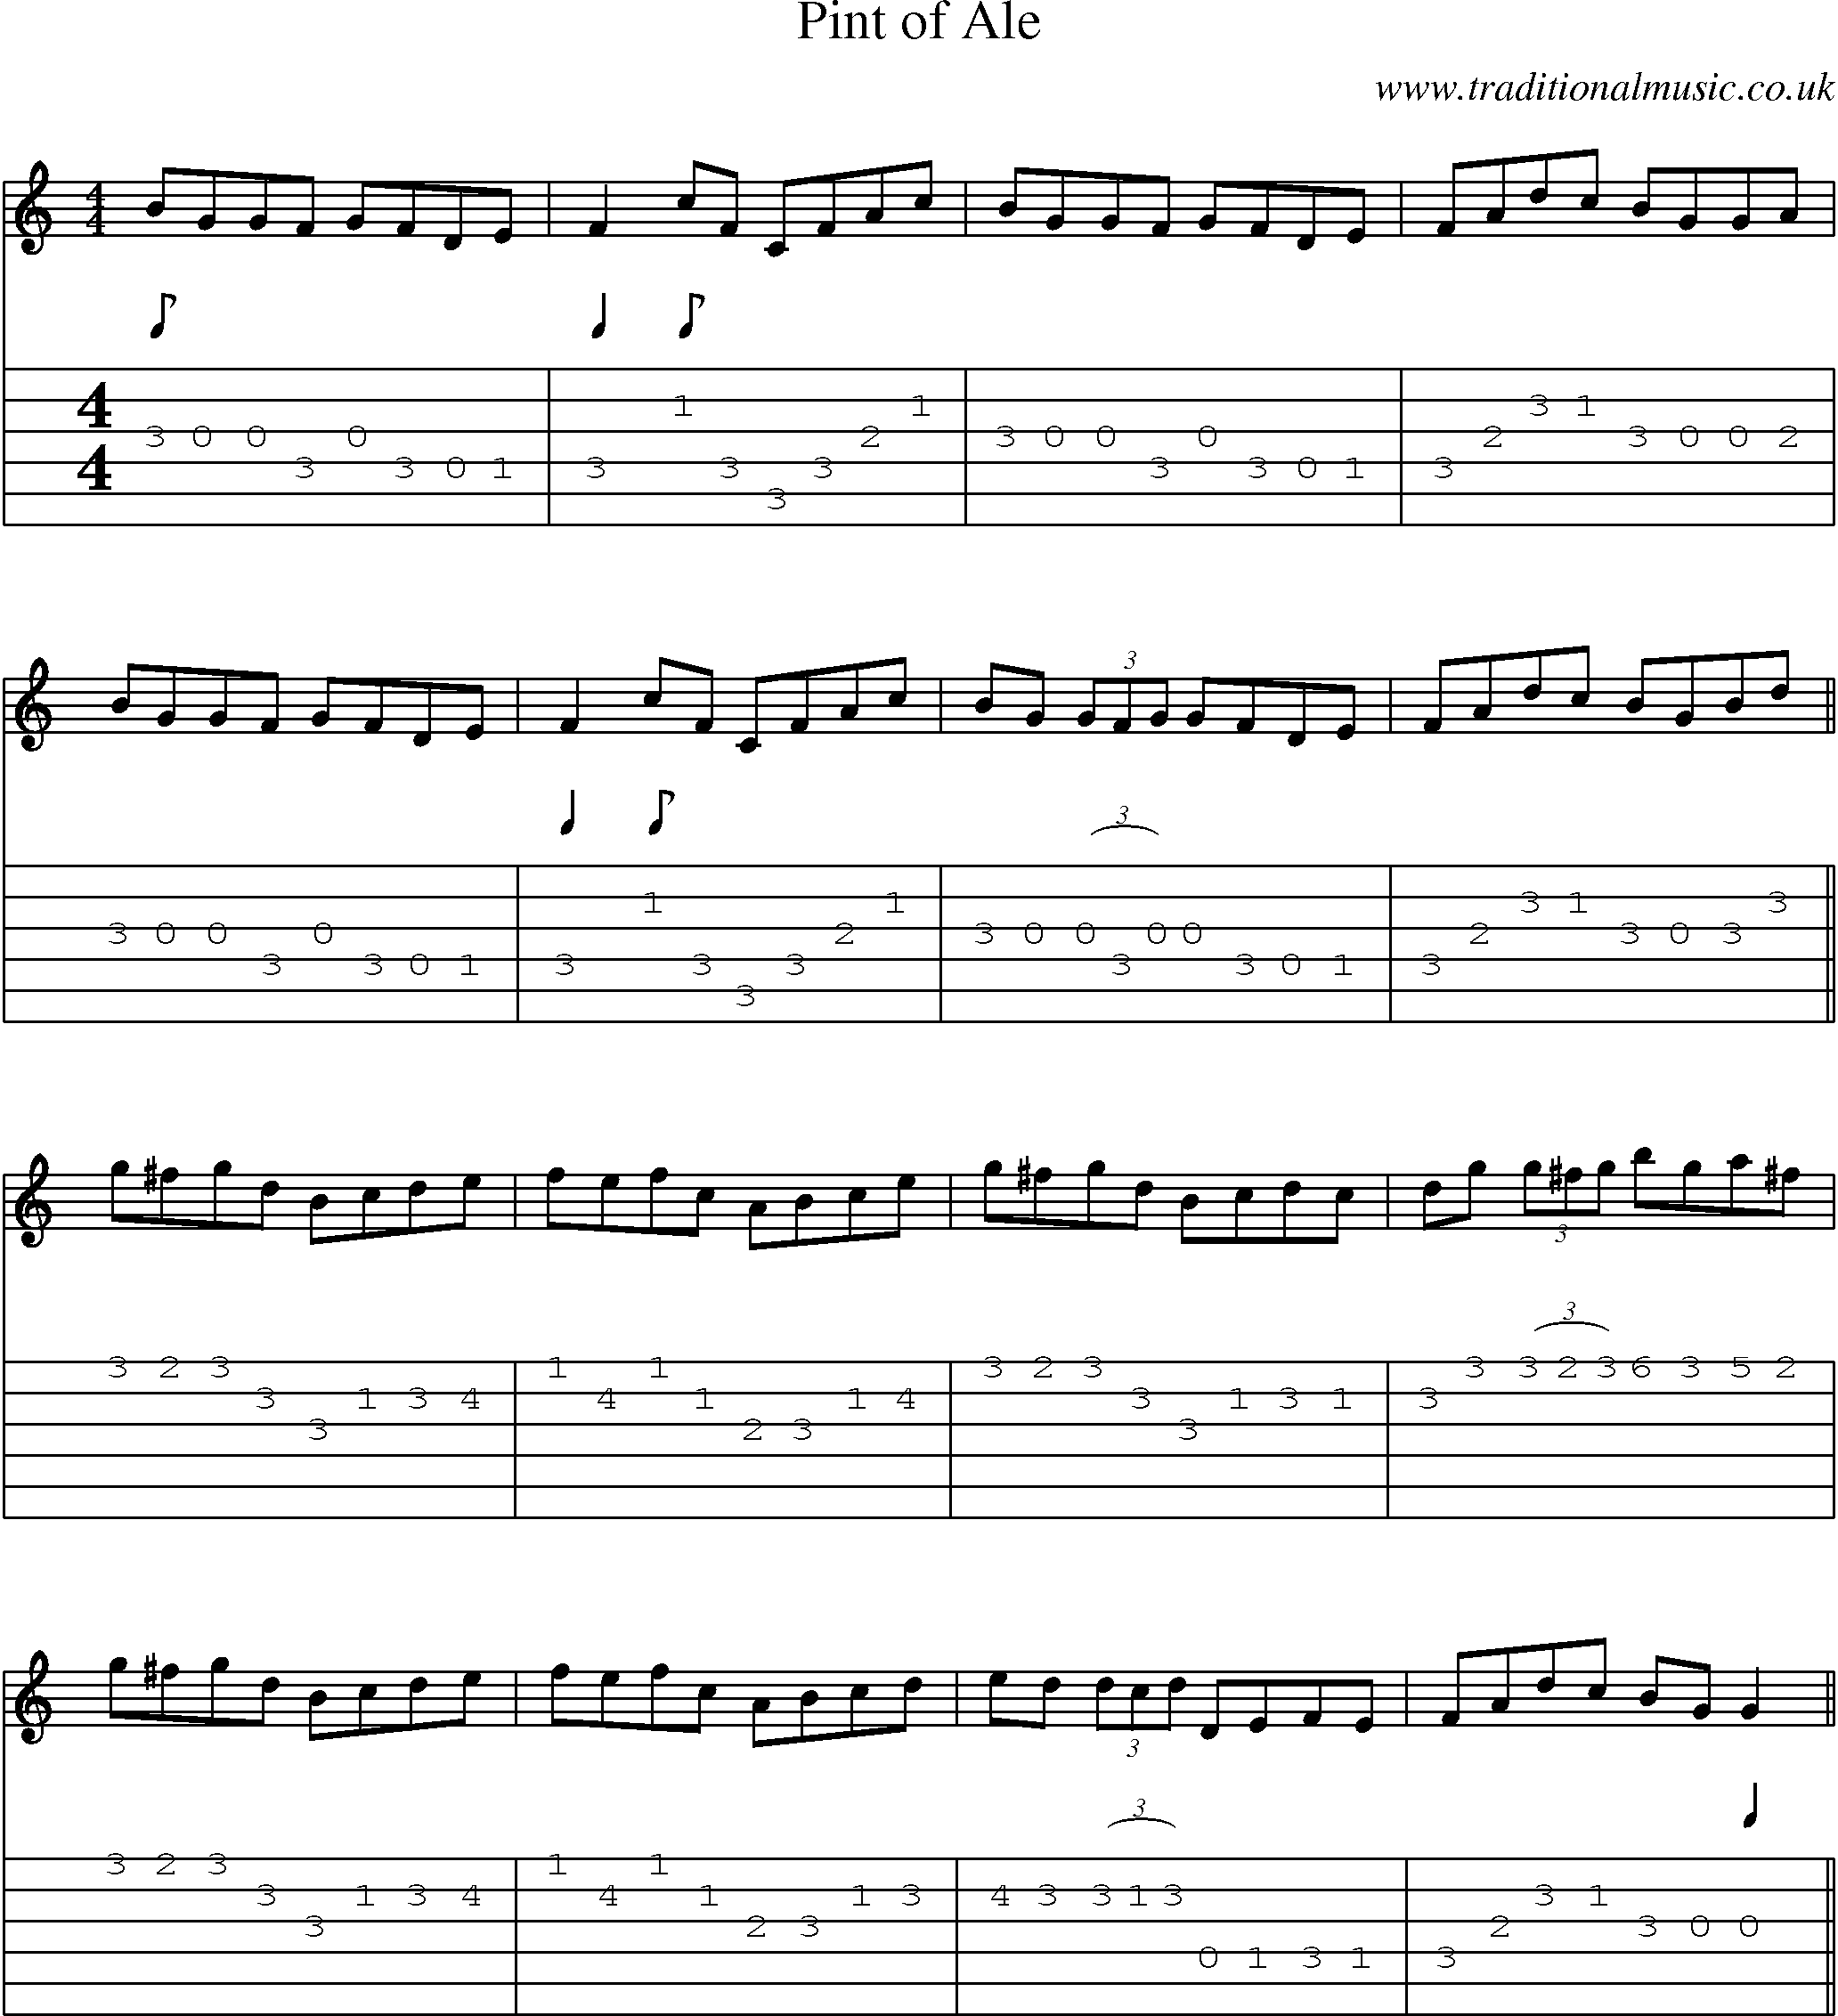 Music Score and Guitar Tabs for Pint Of Ale